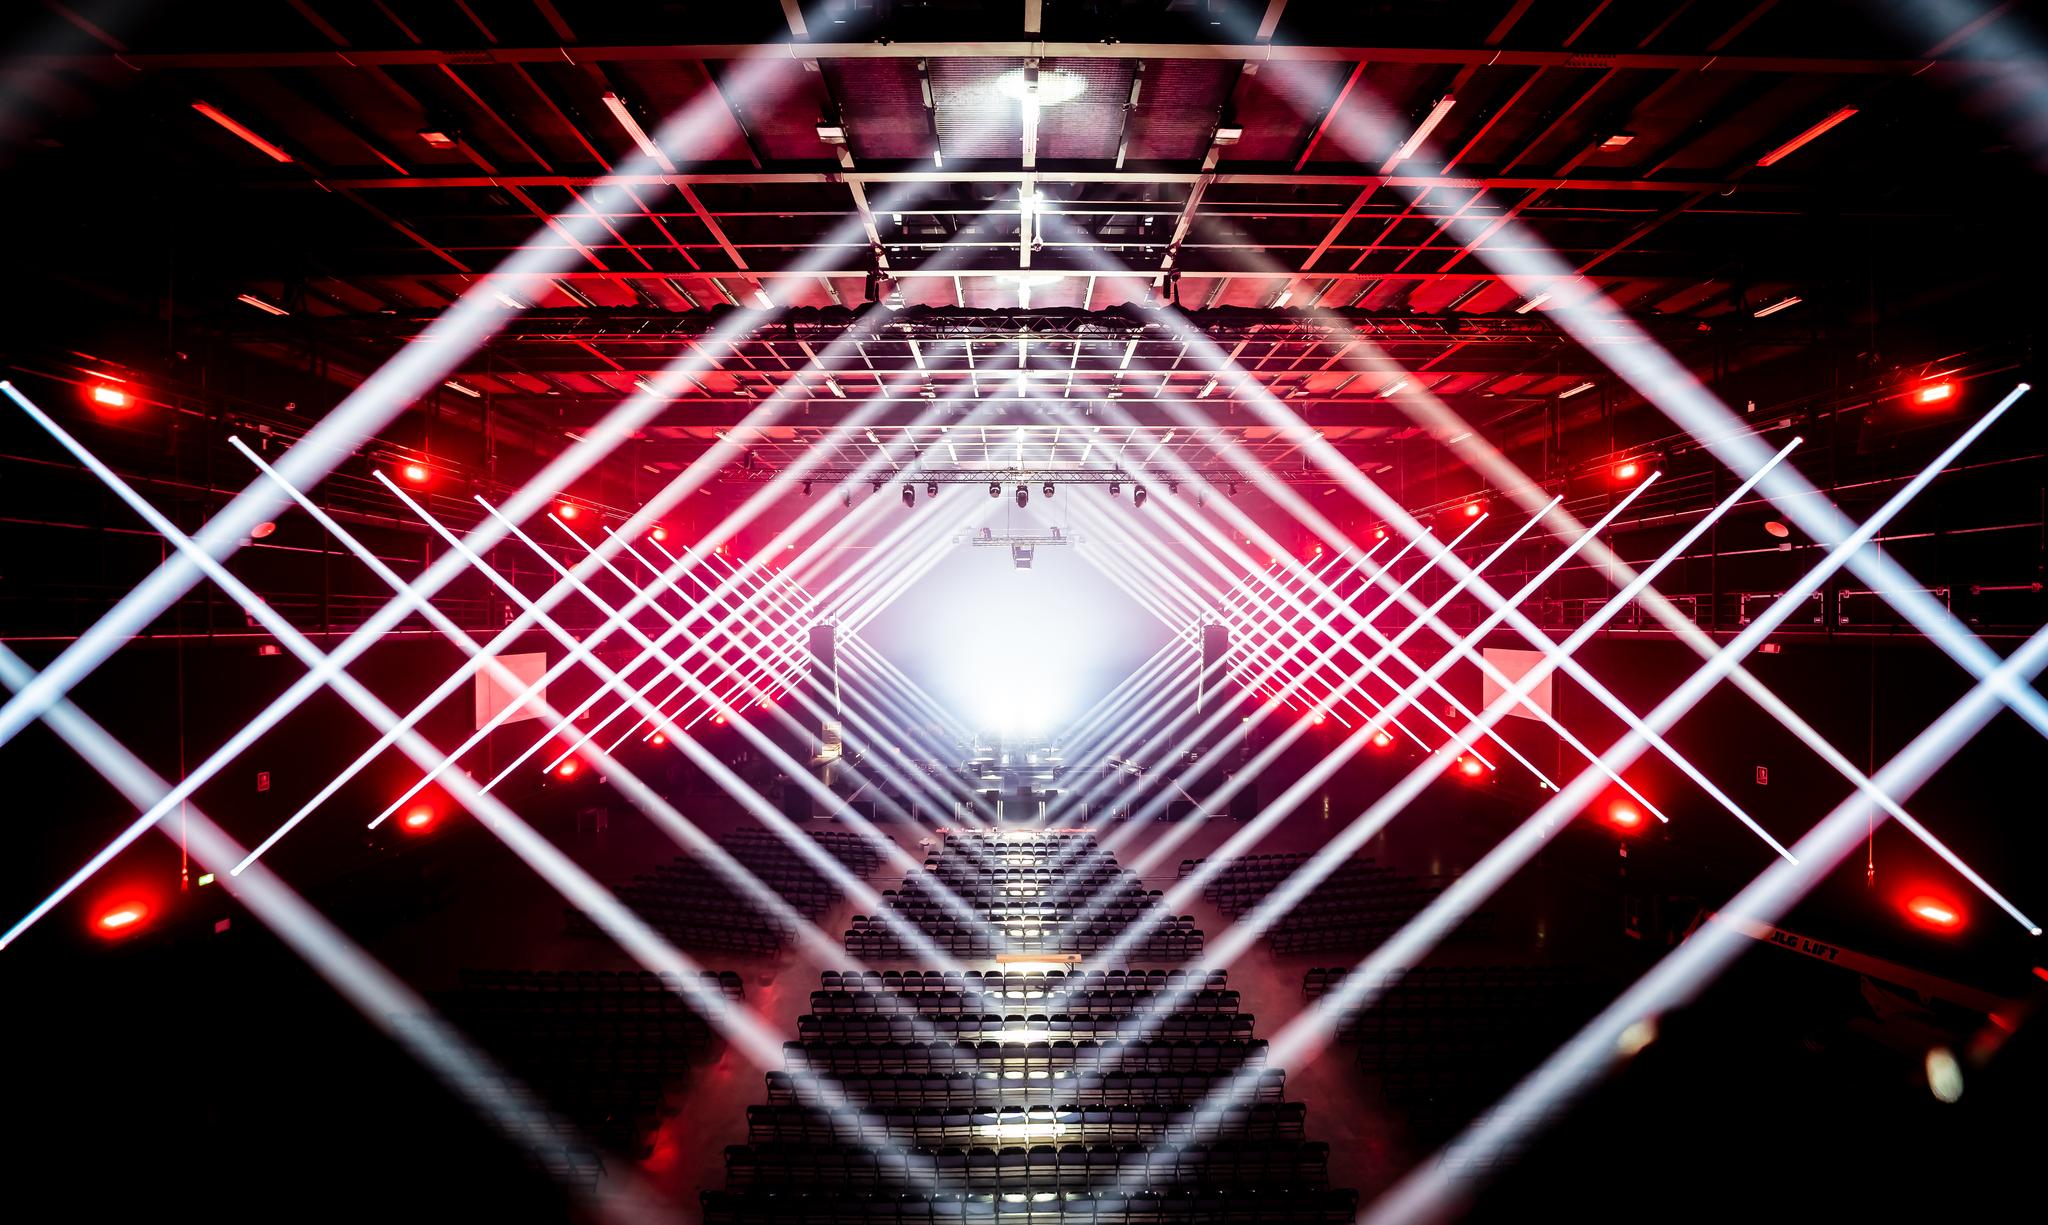 Beams of white light criss cross across an empty red-lit concert hall, forming a multi layered, uniform diamond shape.